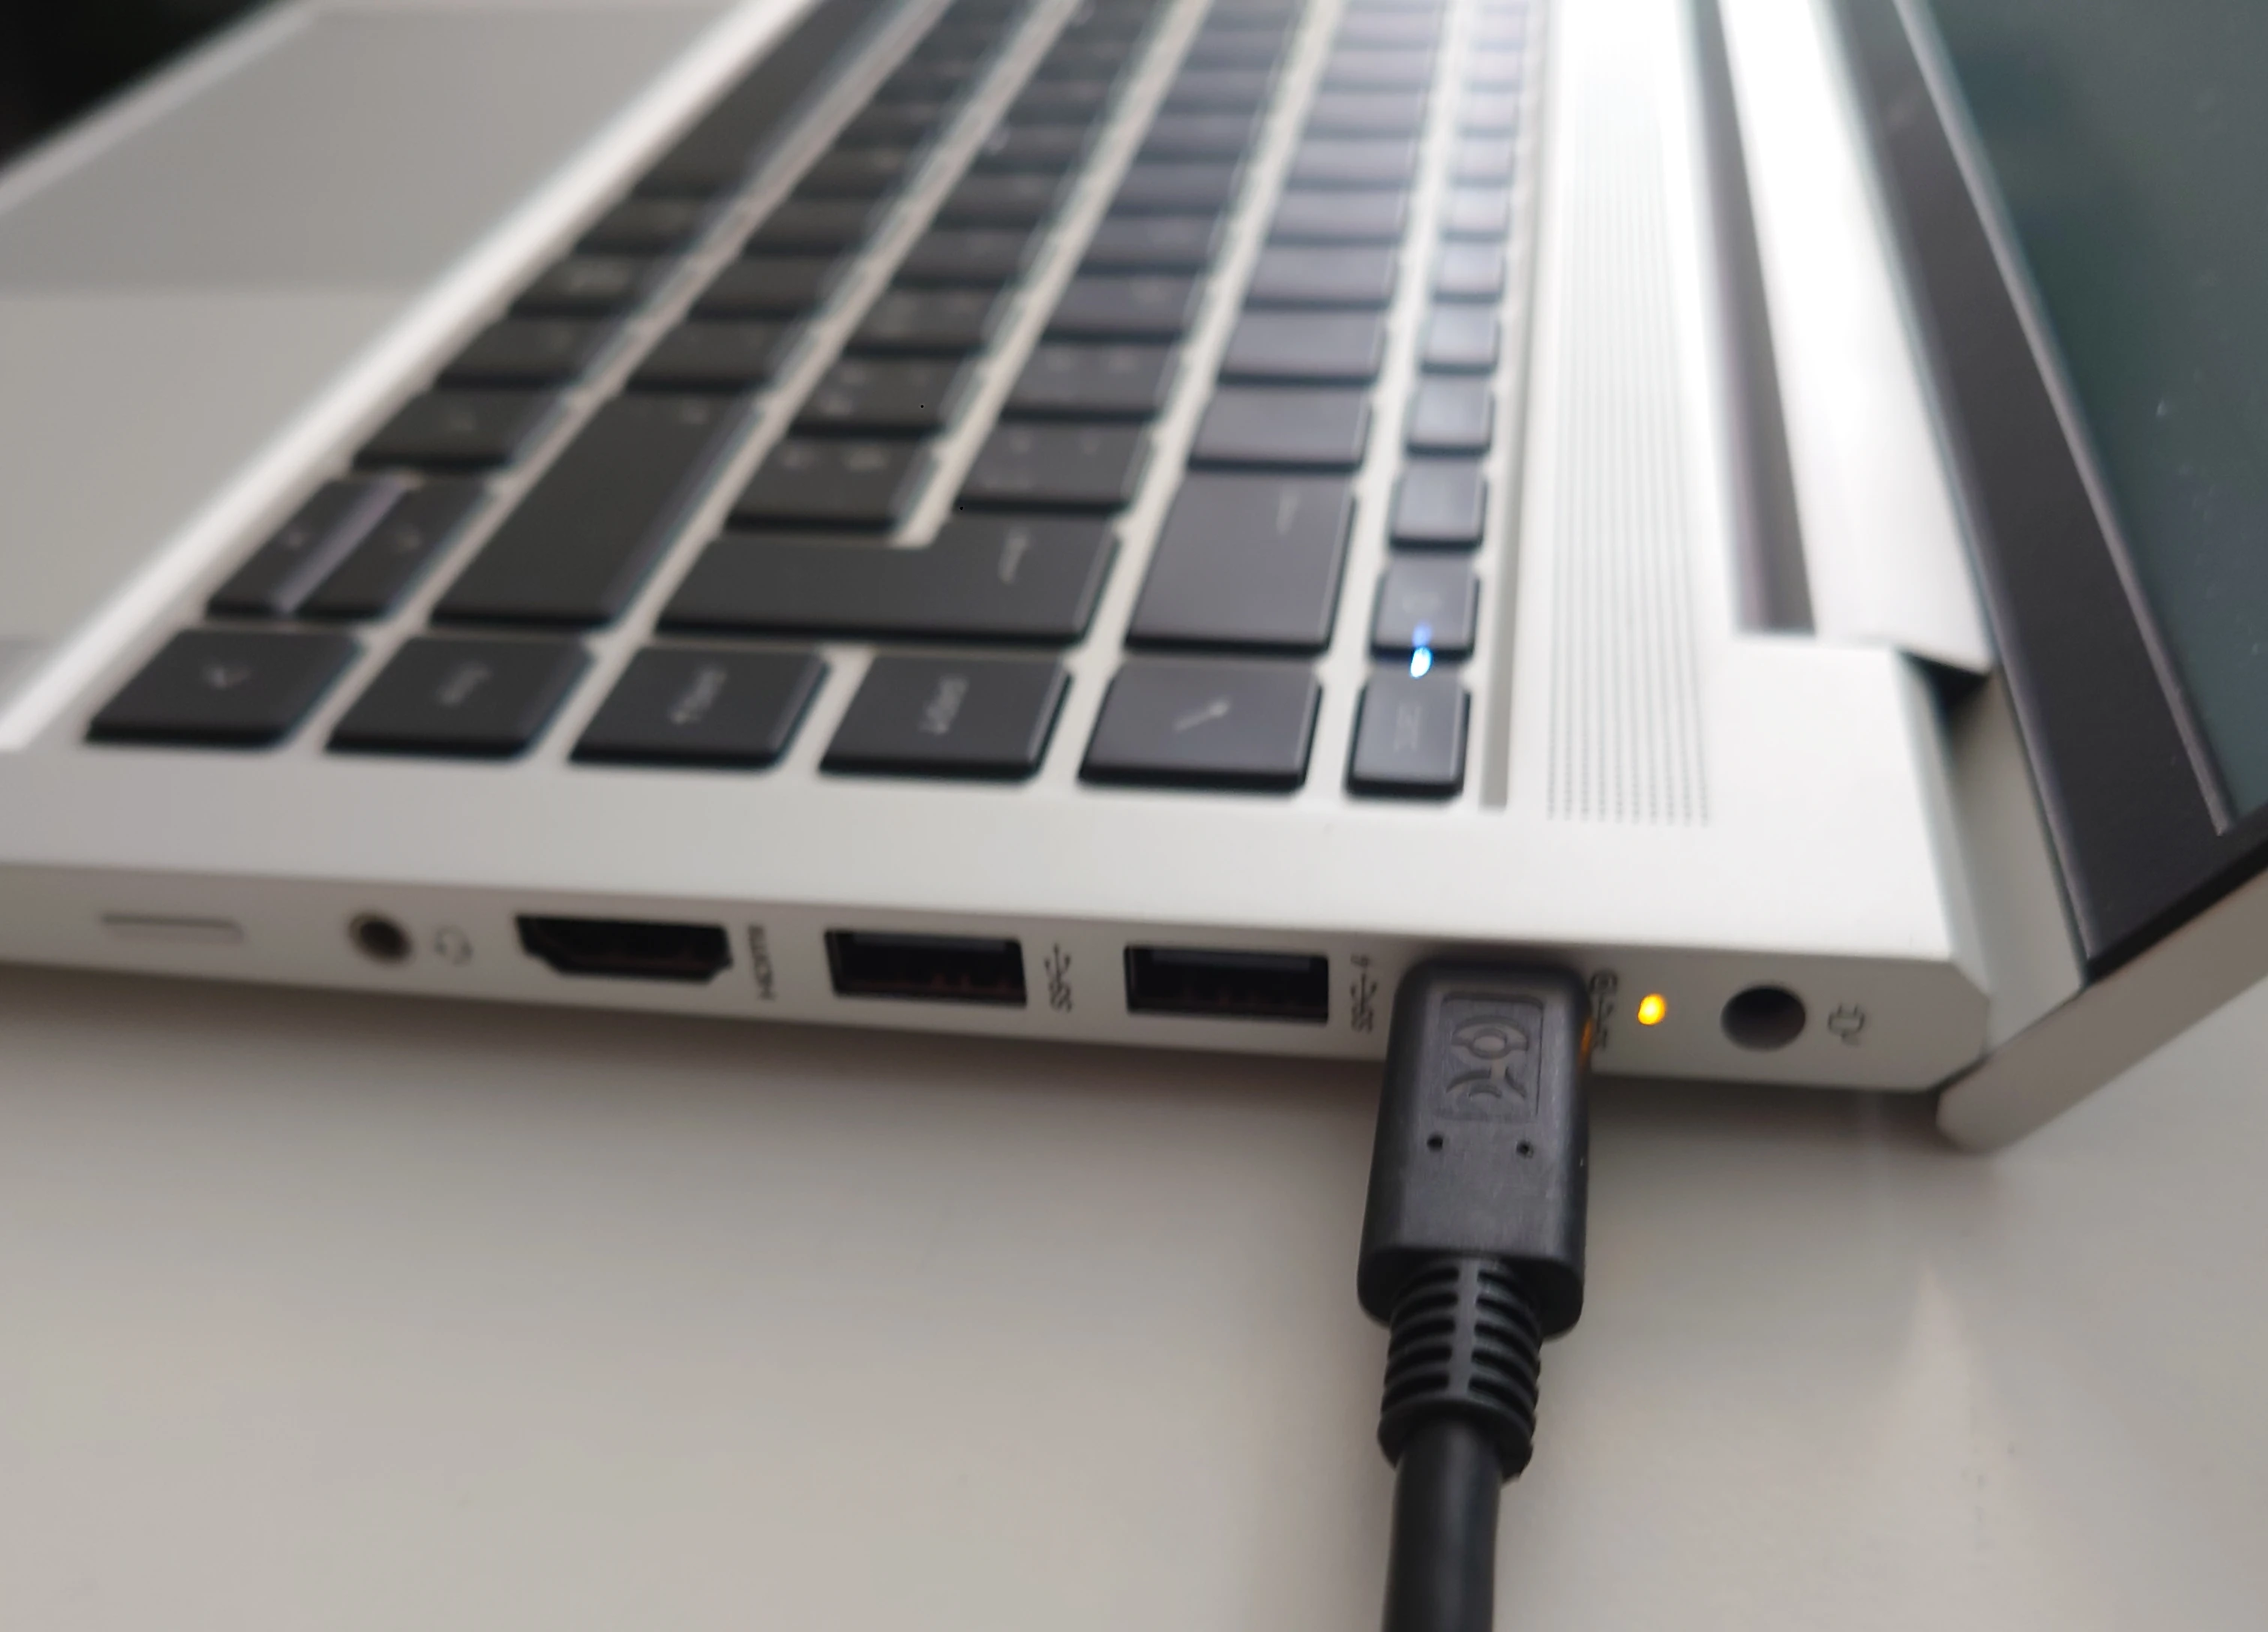 USB Power Delivery on the HP Elitebook 645 G9 laptop